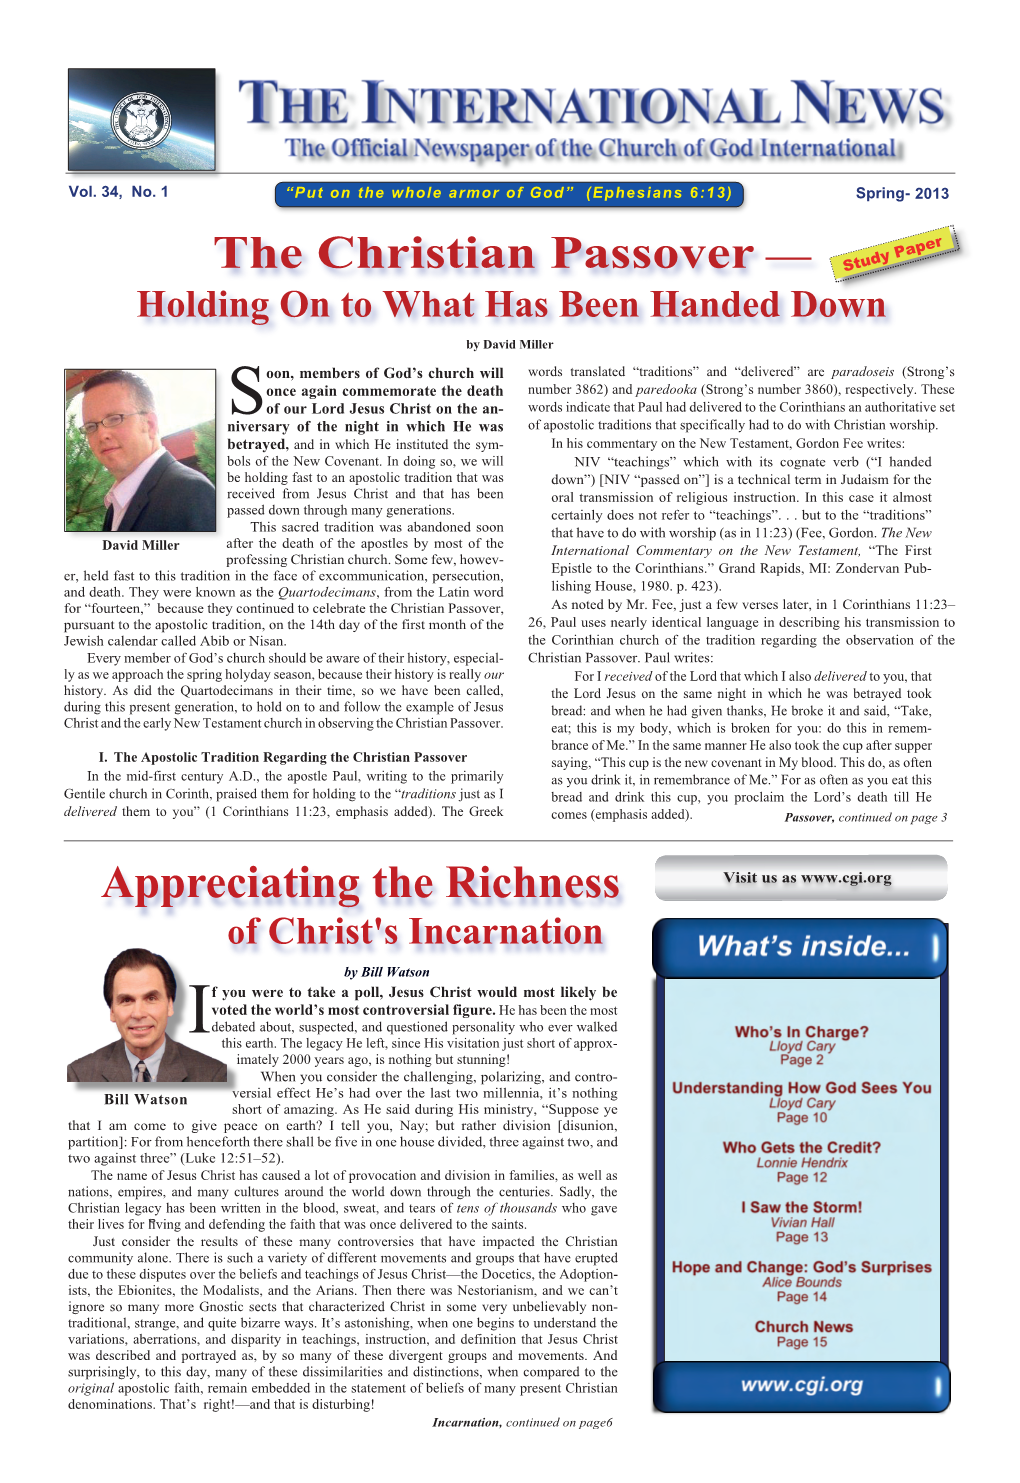 The Christian Passover — Study Paper Holding on to What Has Been Handed Down